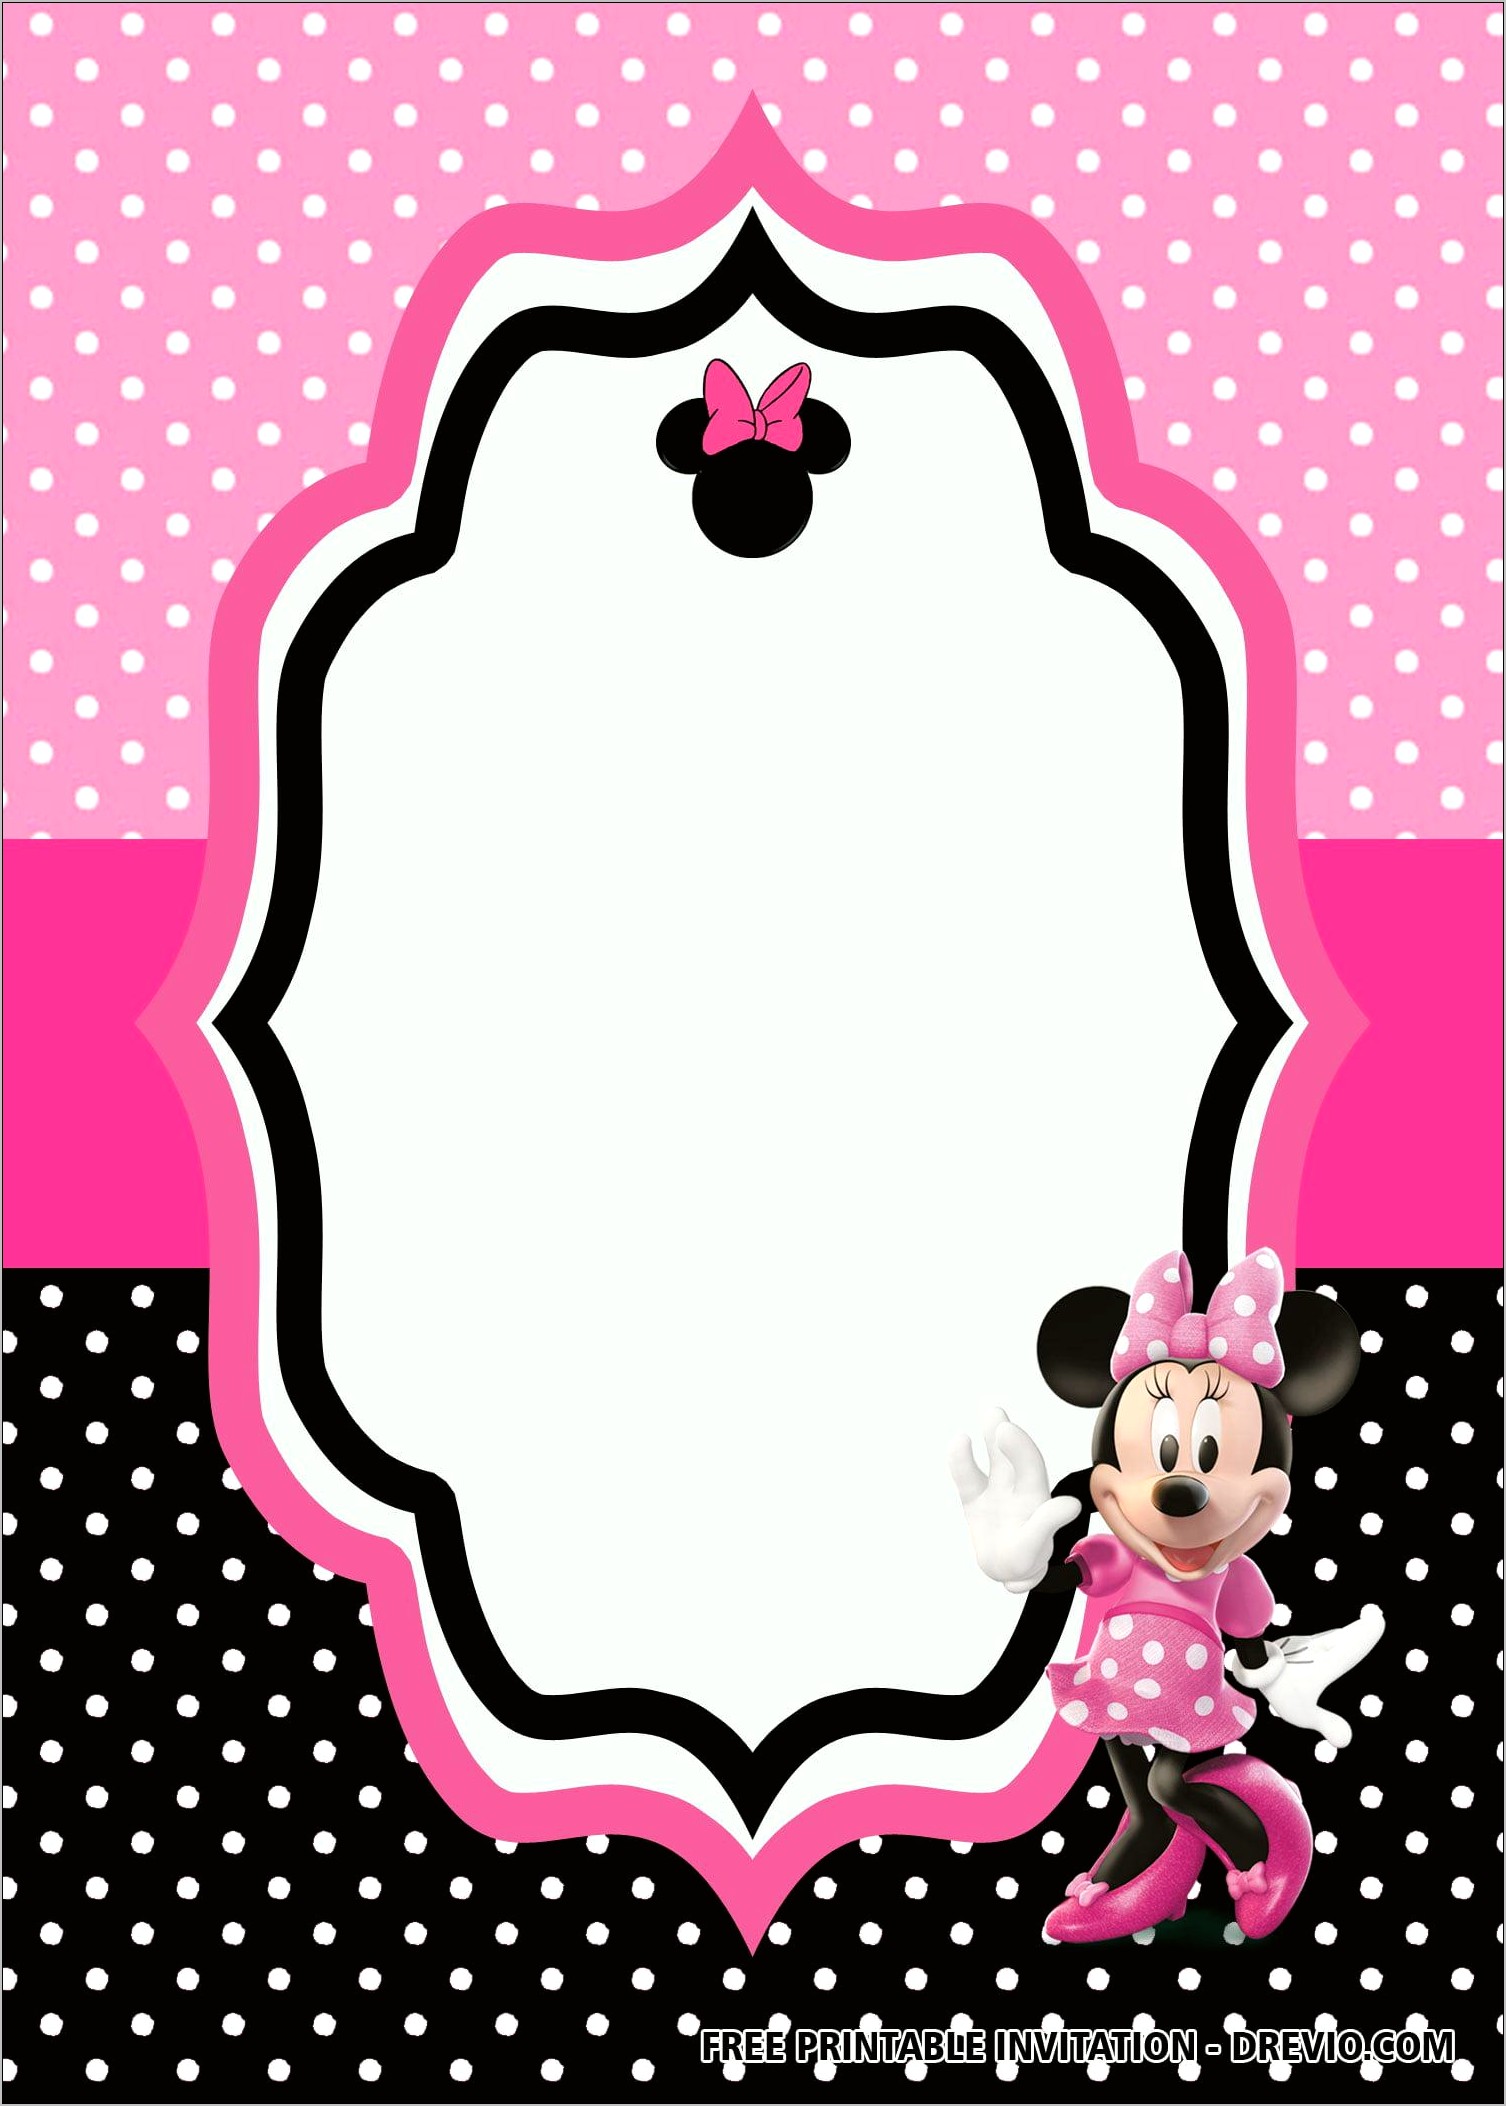 Free Printable Mickey Mouse Invitation Template